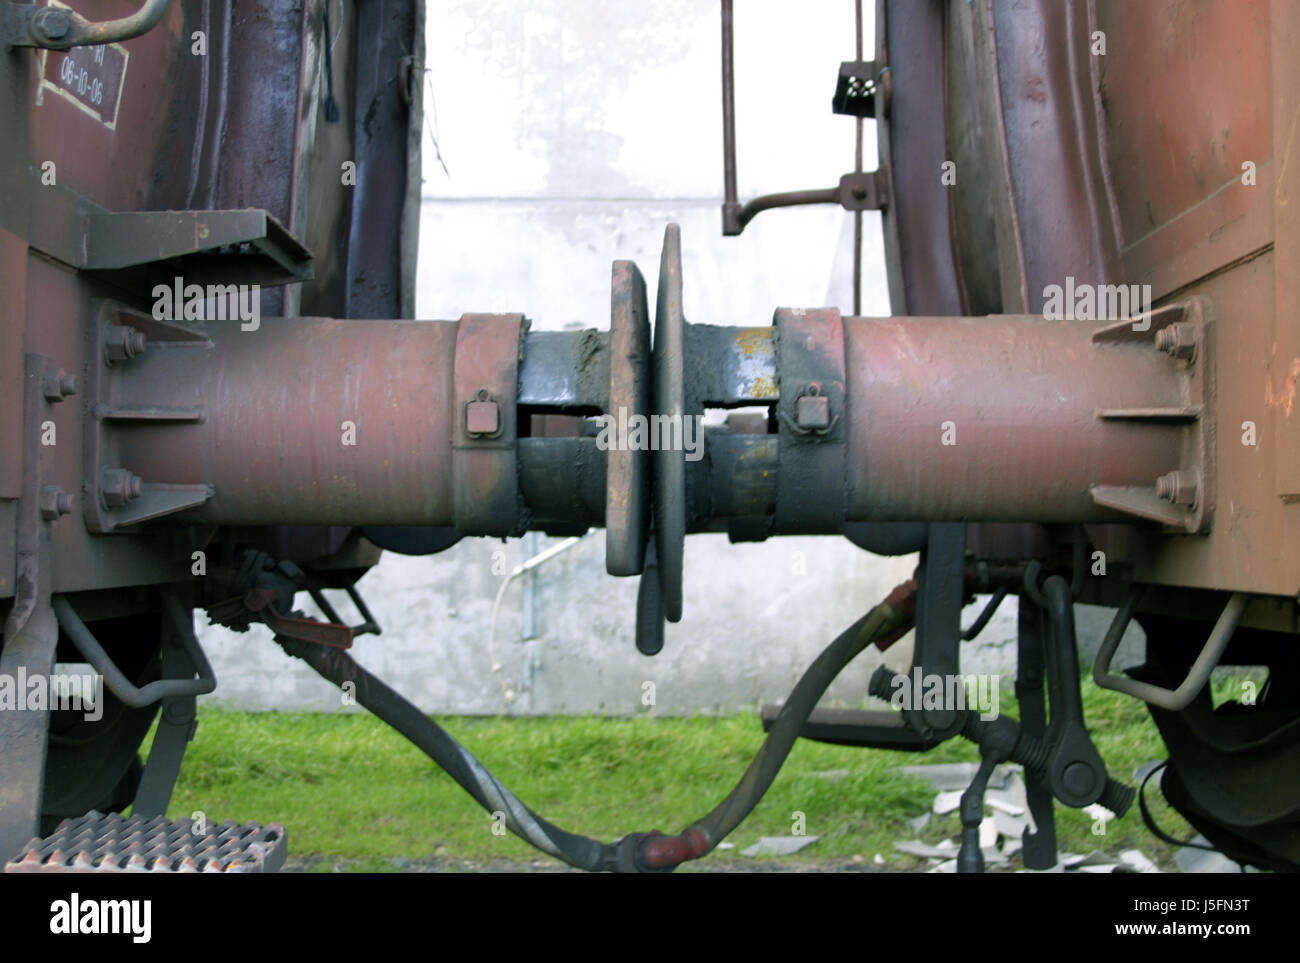 railway locomotive train engine rolling stock vehicle means of travel transport Stock Photo